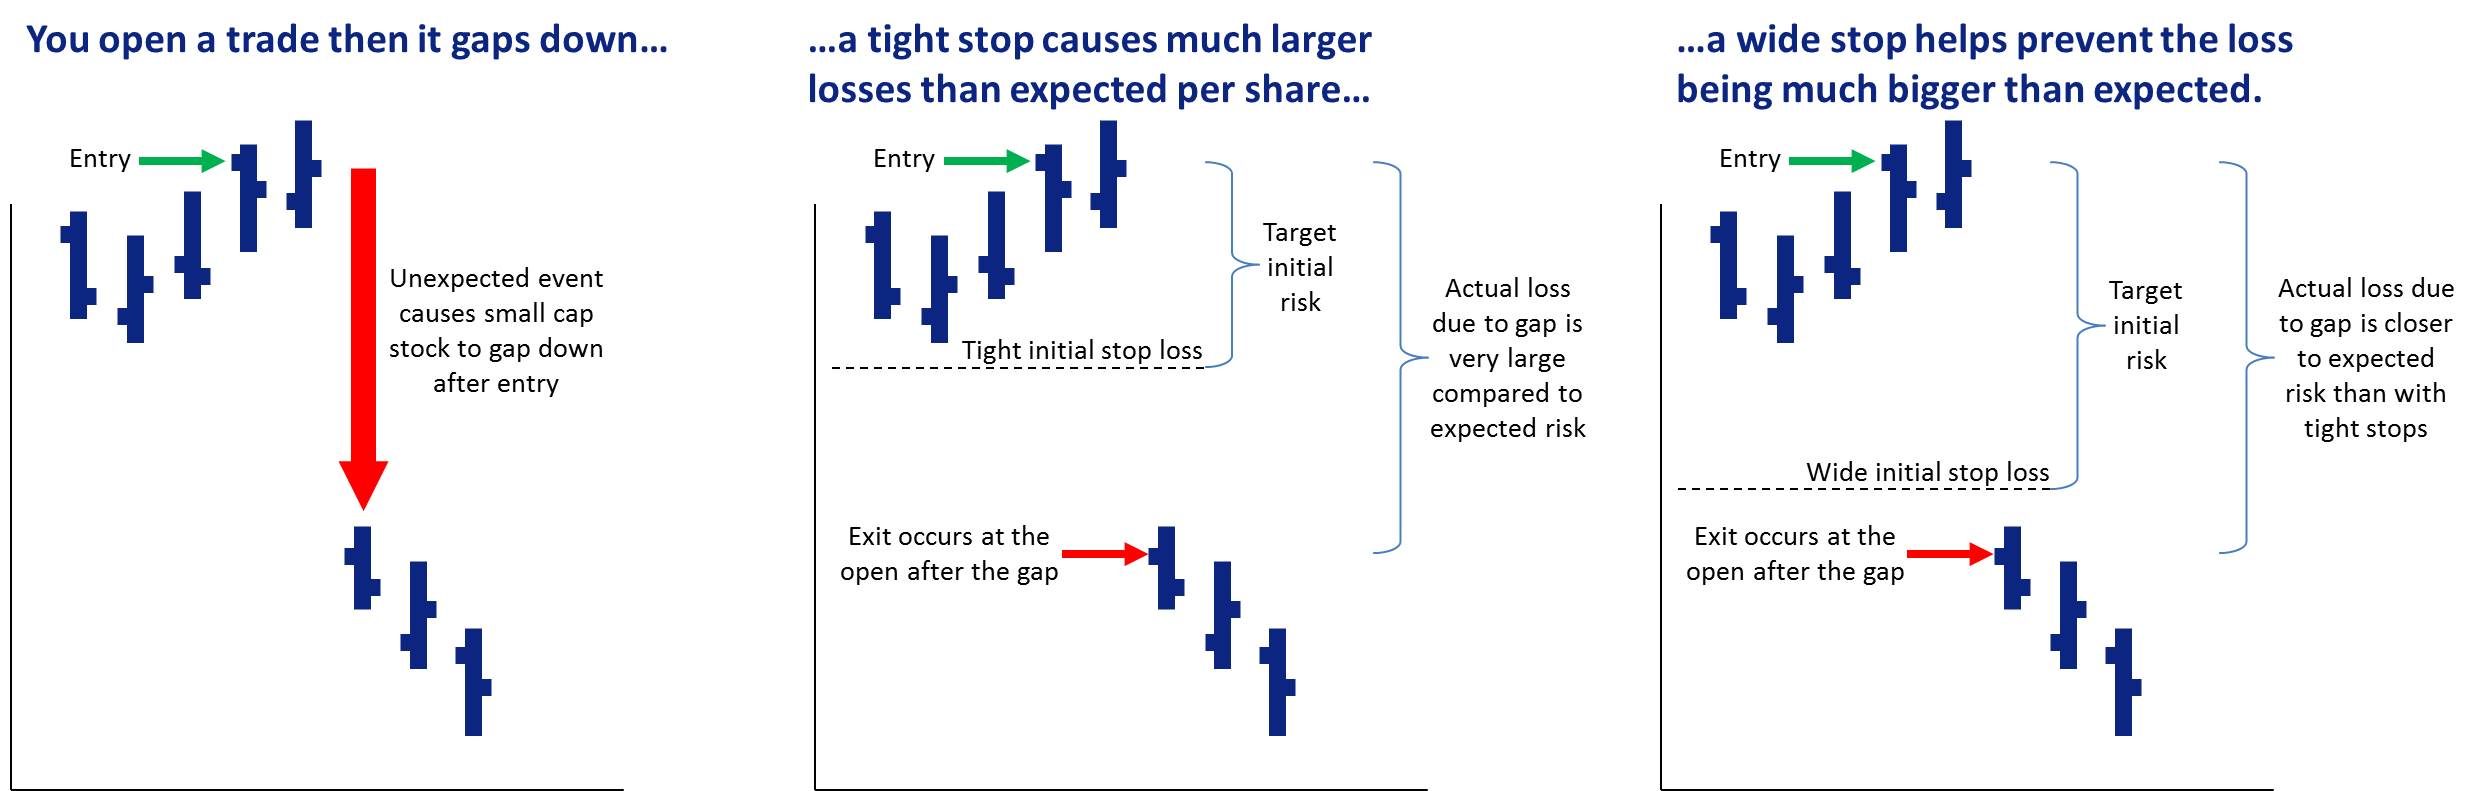 Small cap trading plans should consider using wide initial stop losses to reduce the impact of gaps.